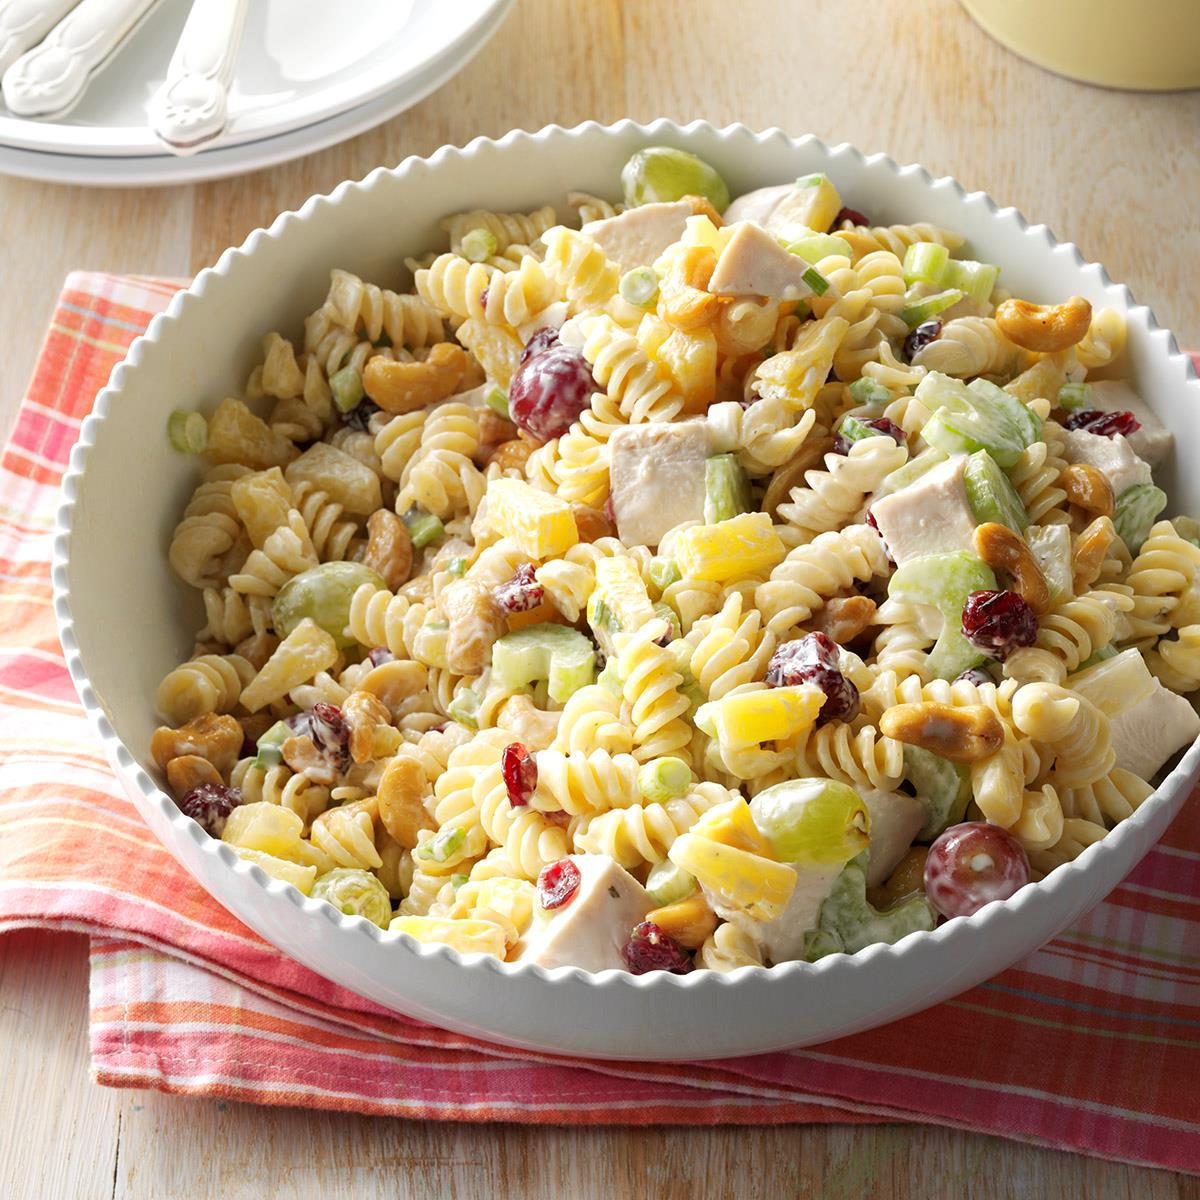 21 Pasta salad recipes - Discover some of our favourite cold pasta